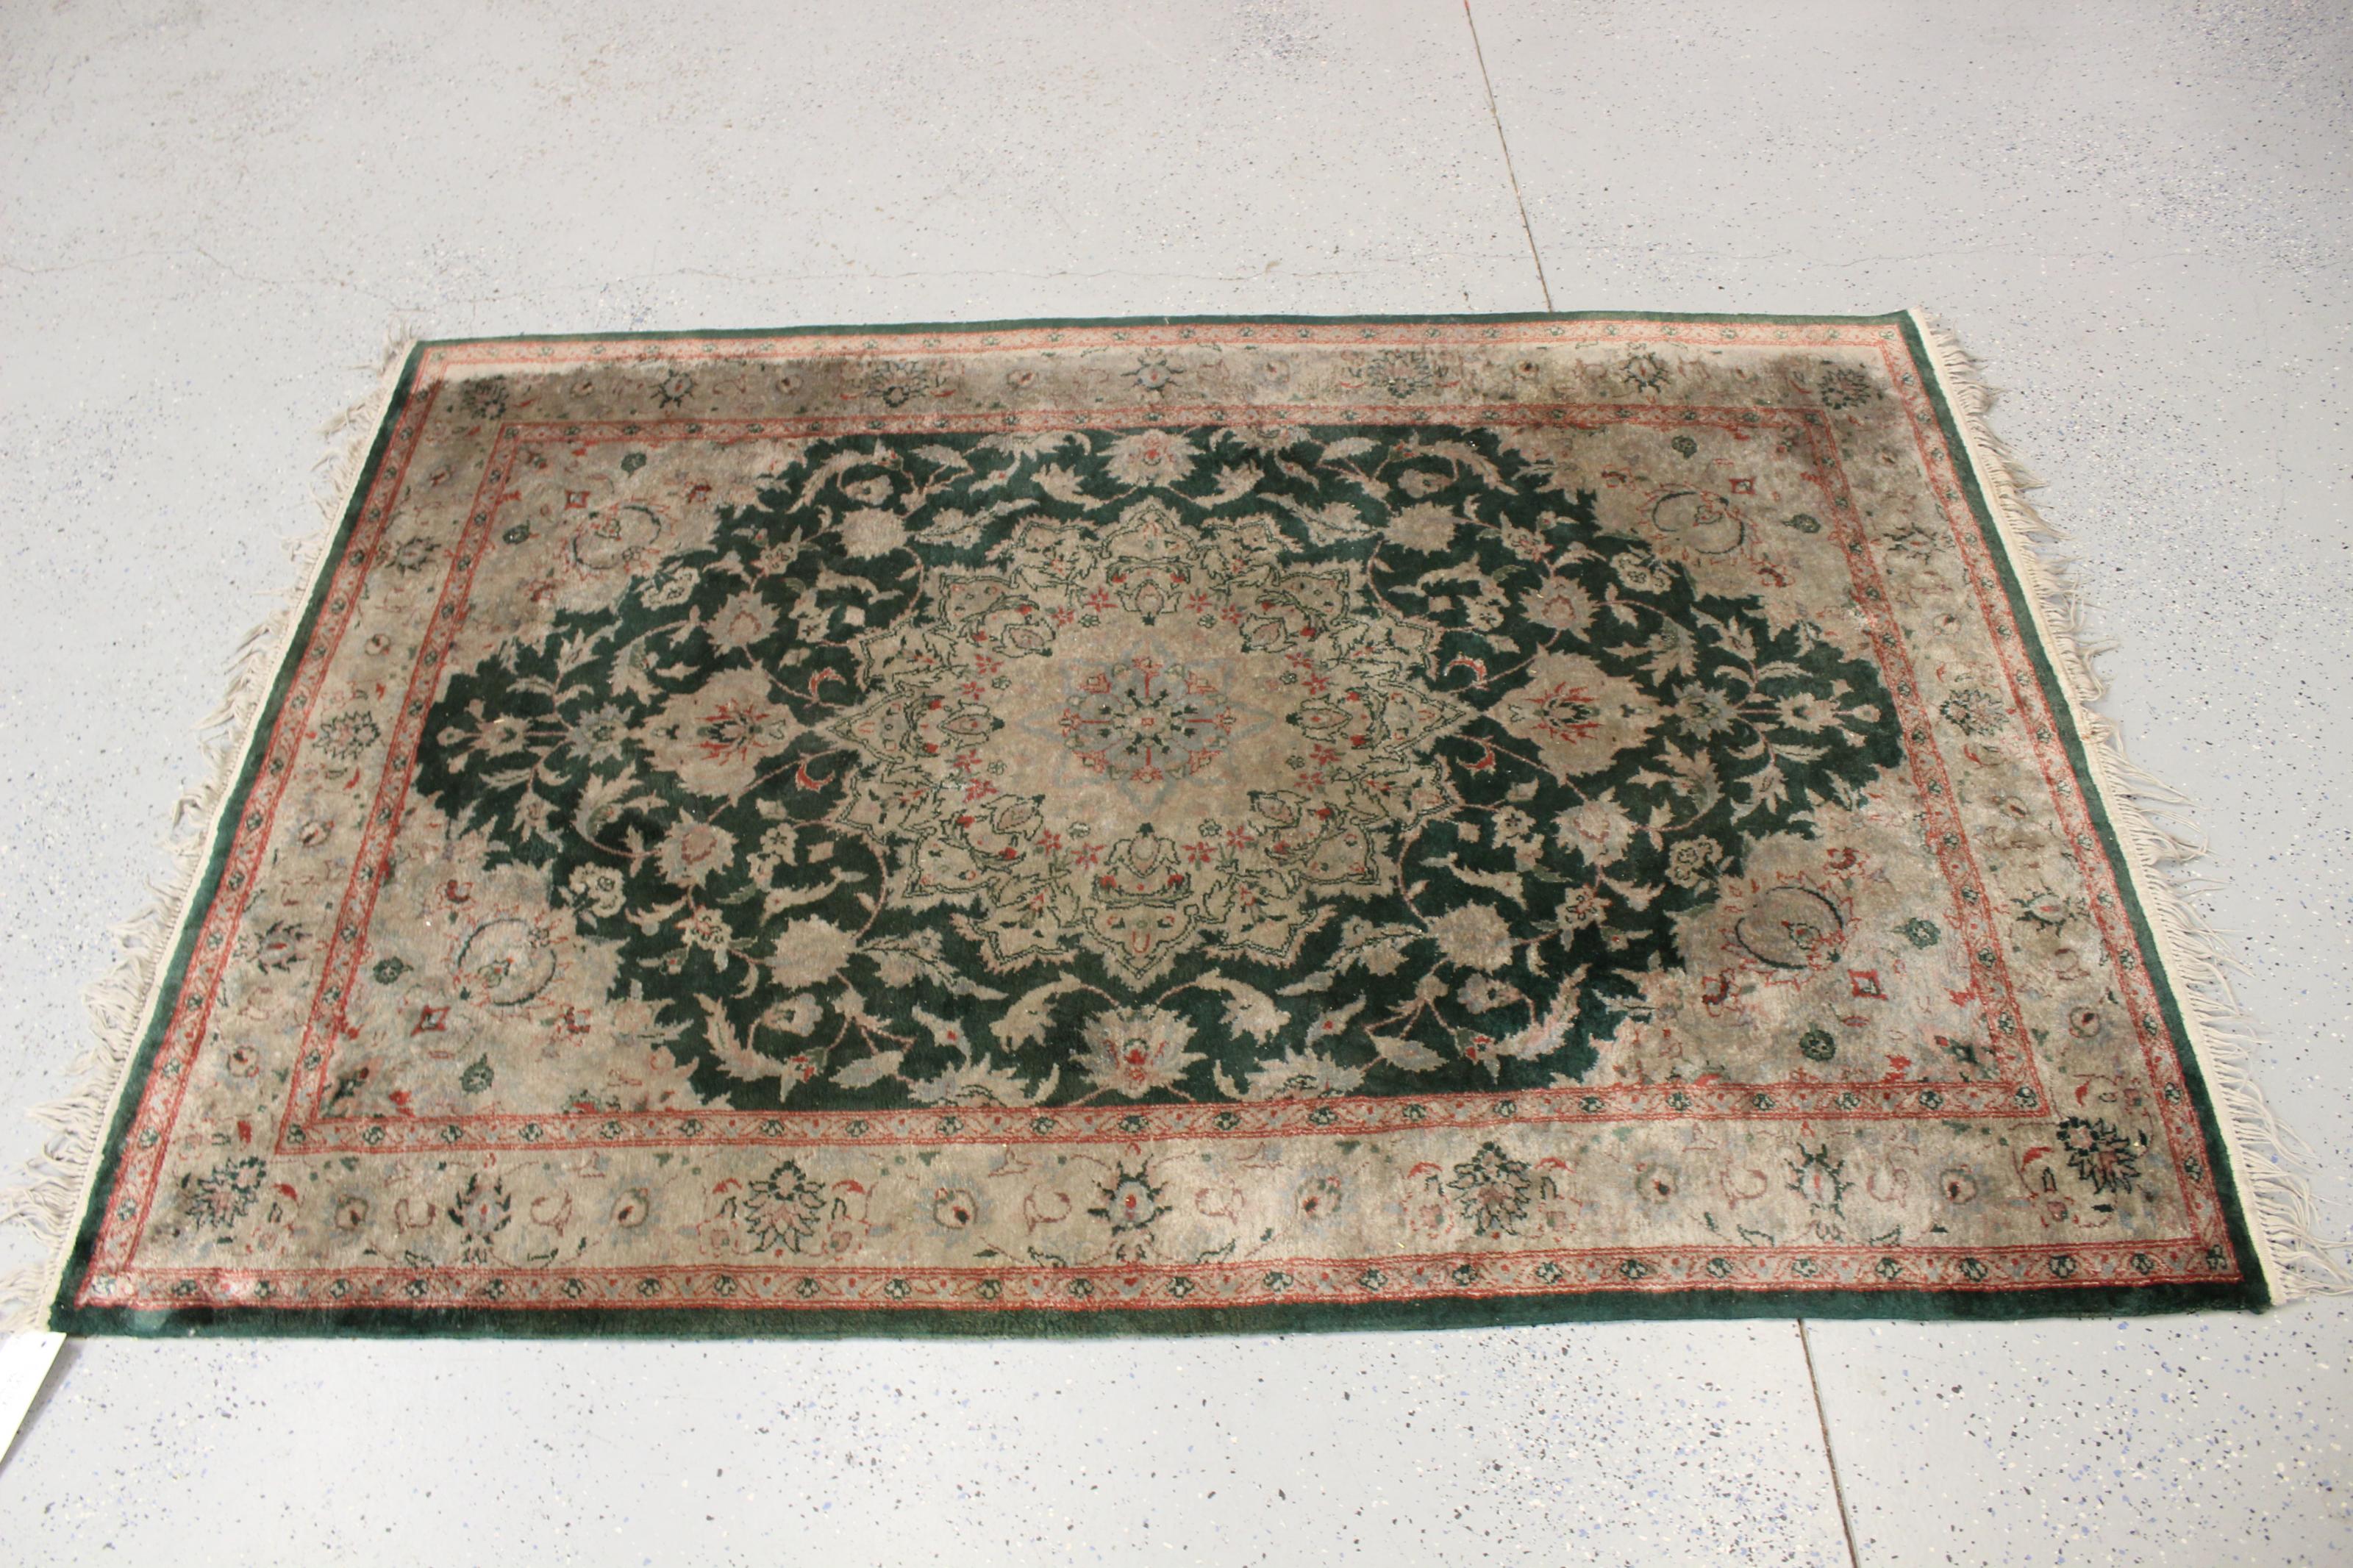 Prescott Oriental Rug Cleaner. Why Rugs Smell When Damp?